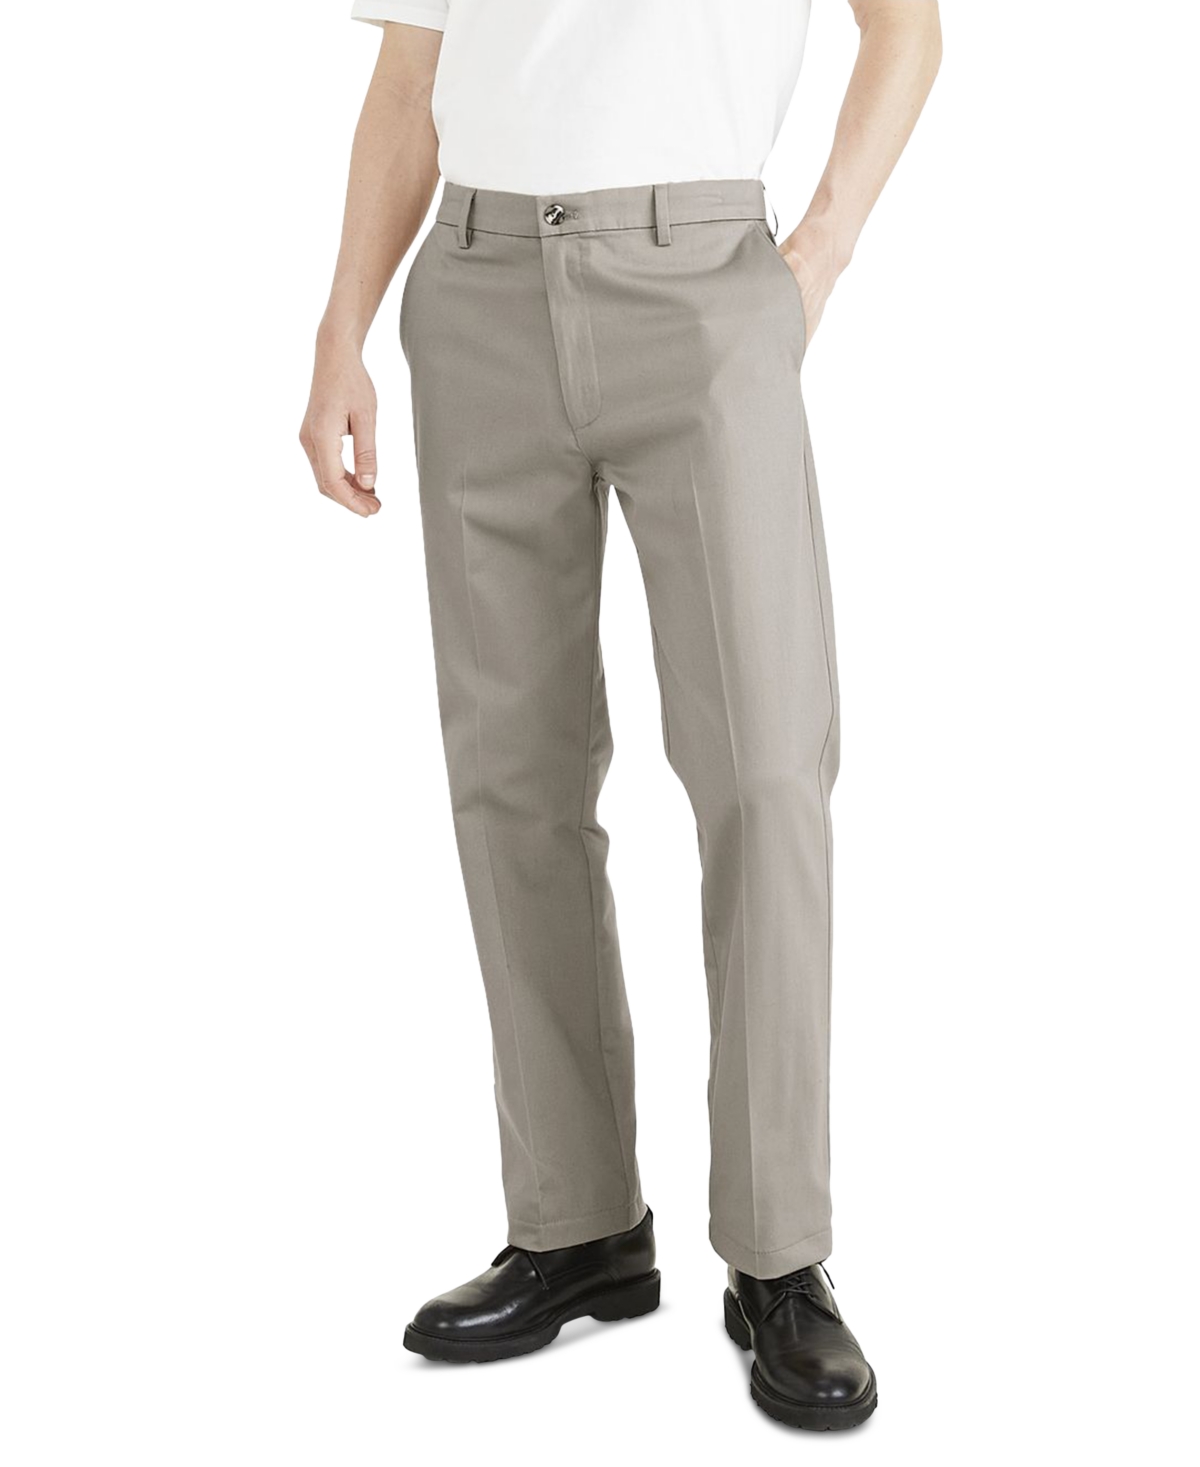 Men's Signature Classic Fit Iron Free Khaki Pants with Stain Defender - Cloud